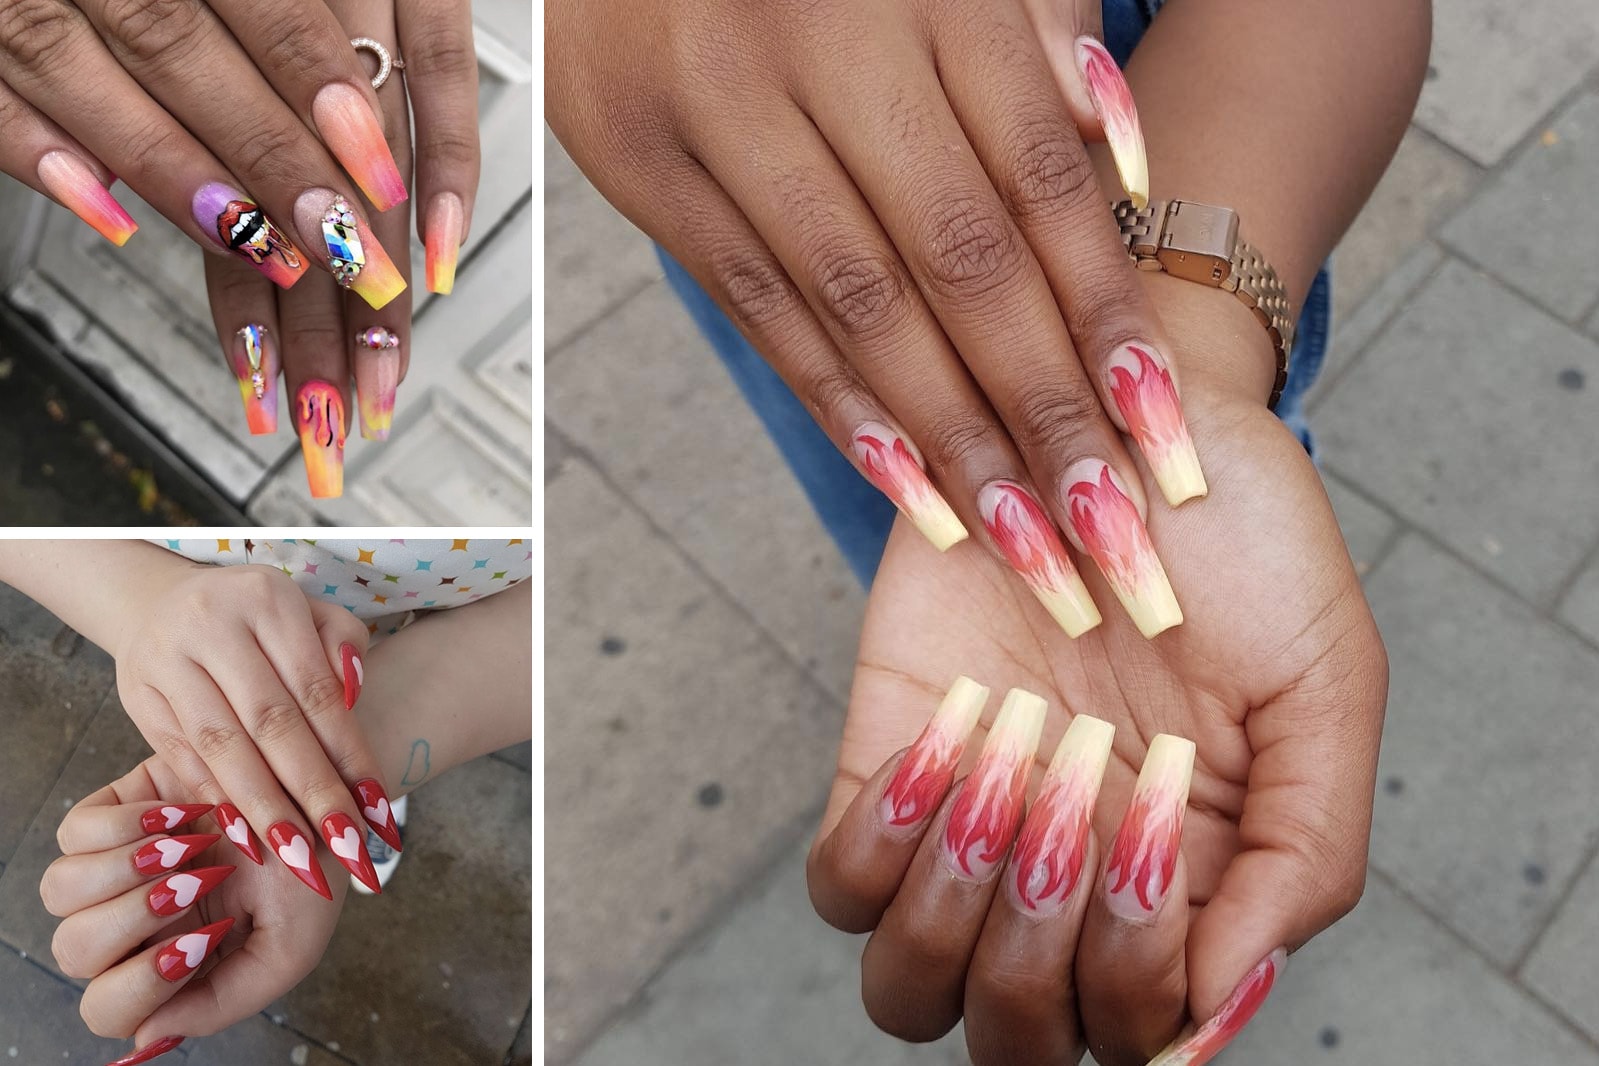 1. The Best Nail Art Salons in Nashville - wide 4